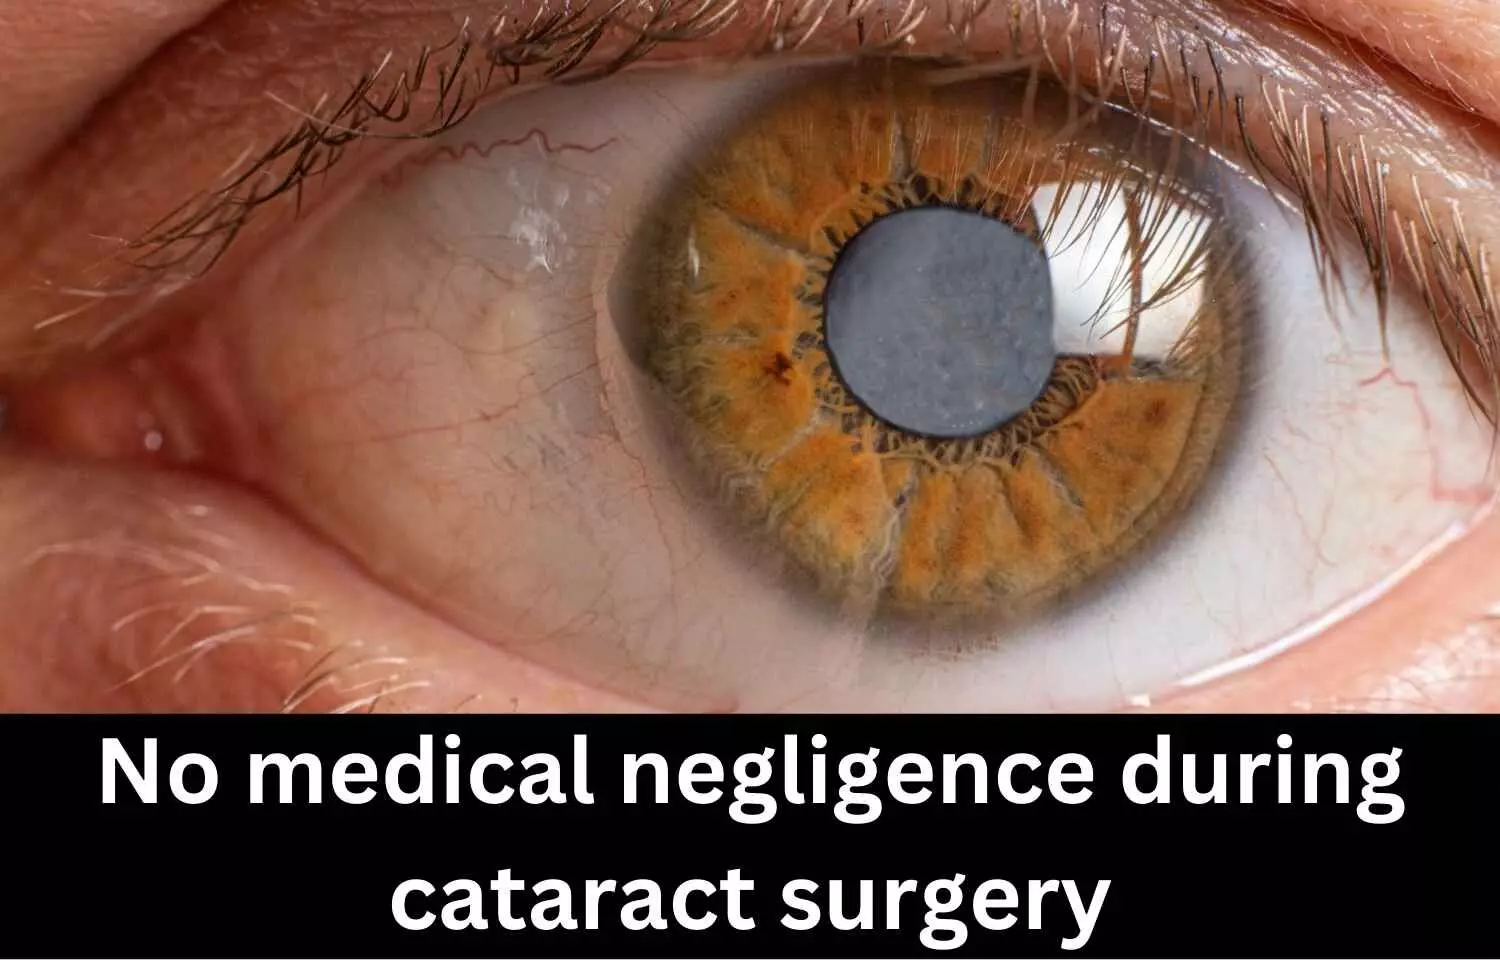 NCDRC exonerates Ophthalmologist, Eye Hospital from charges of medical negligence during cataract surgery